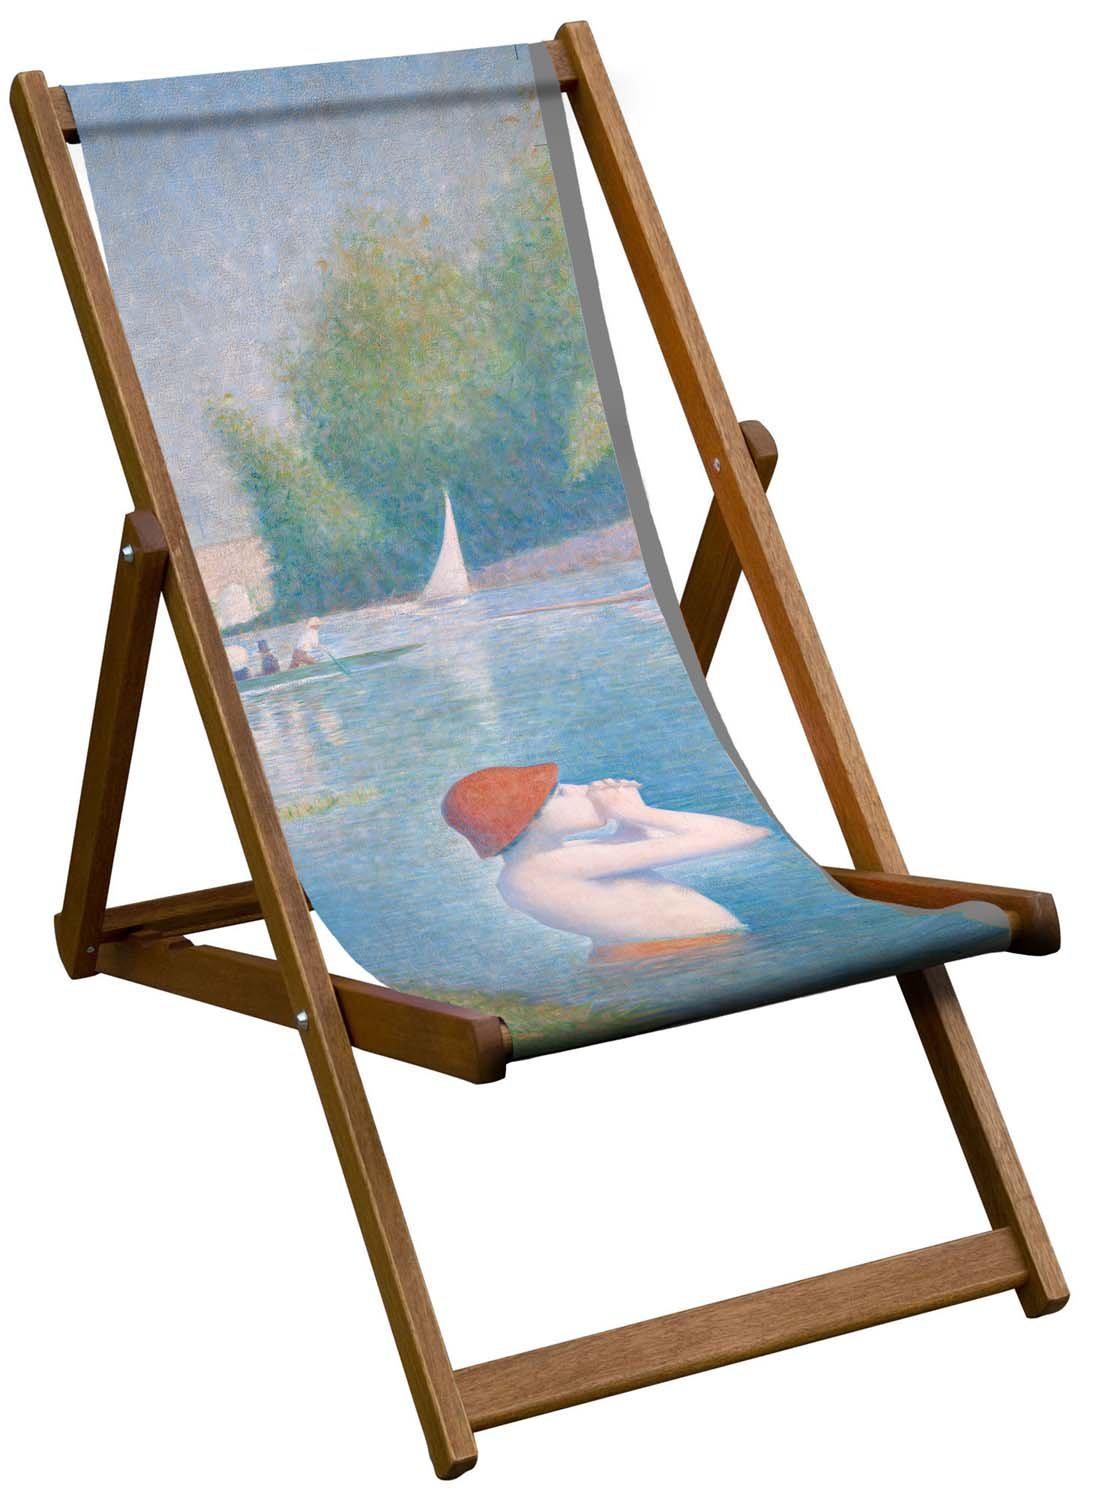 Bathers at Asnieres Detail II -  Georges Seurat - National Gallery Deckchair